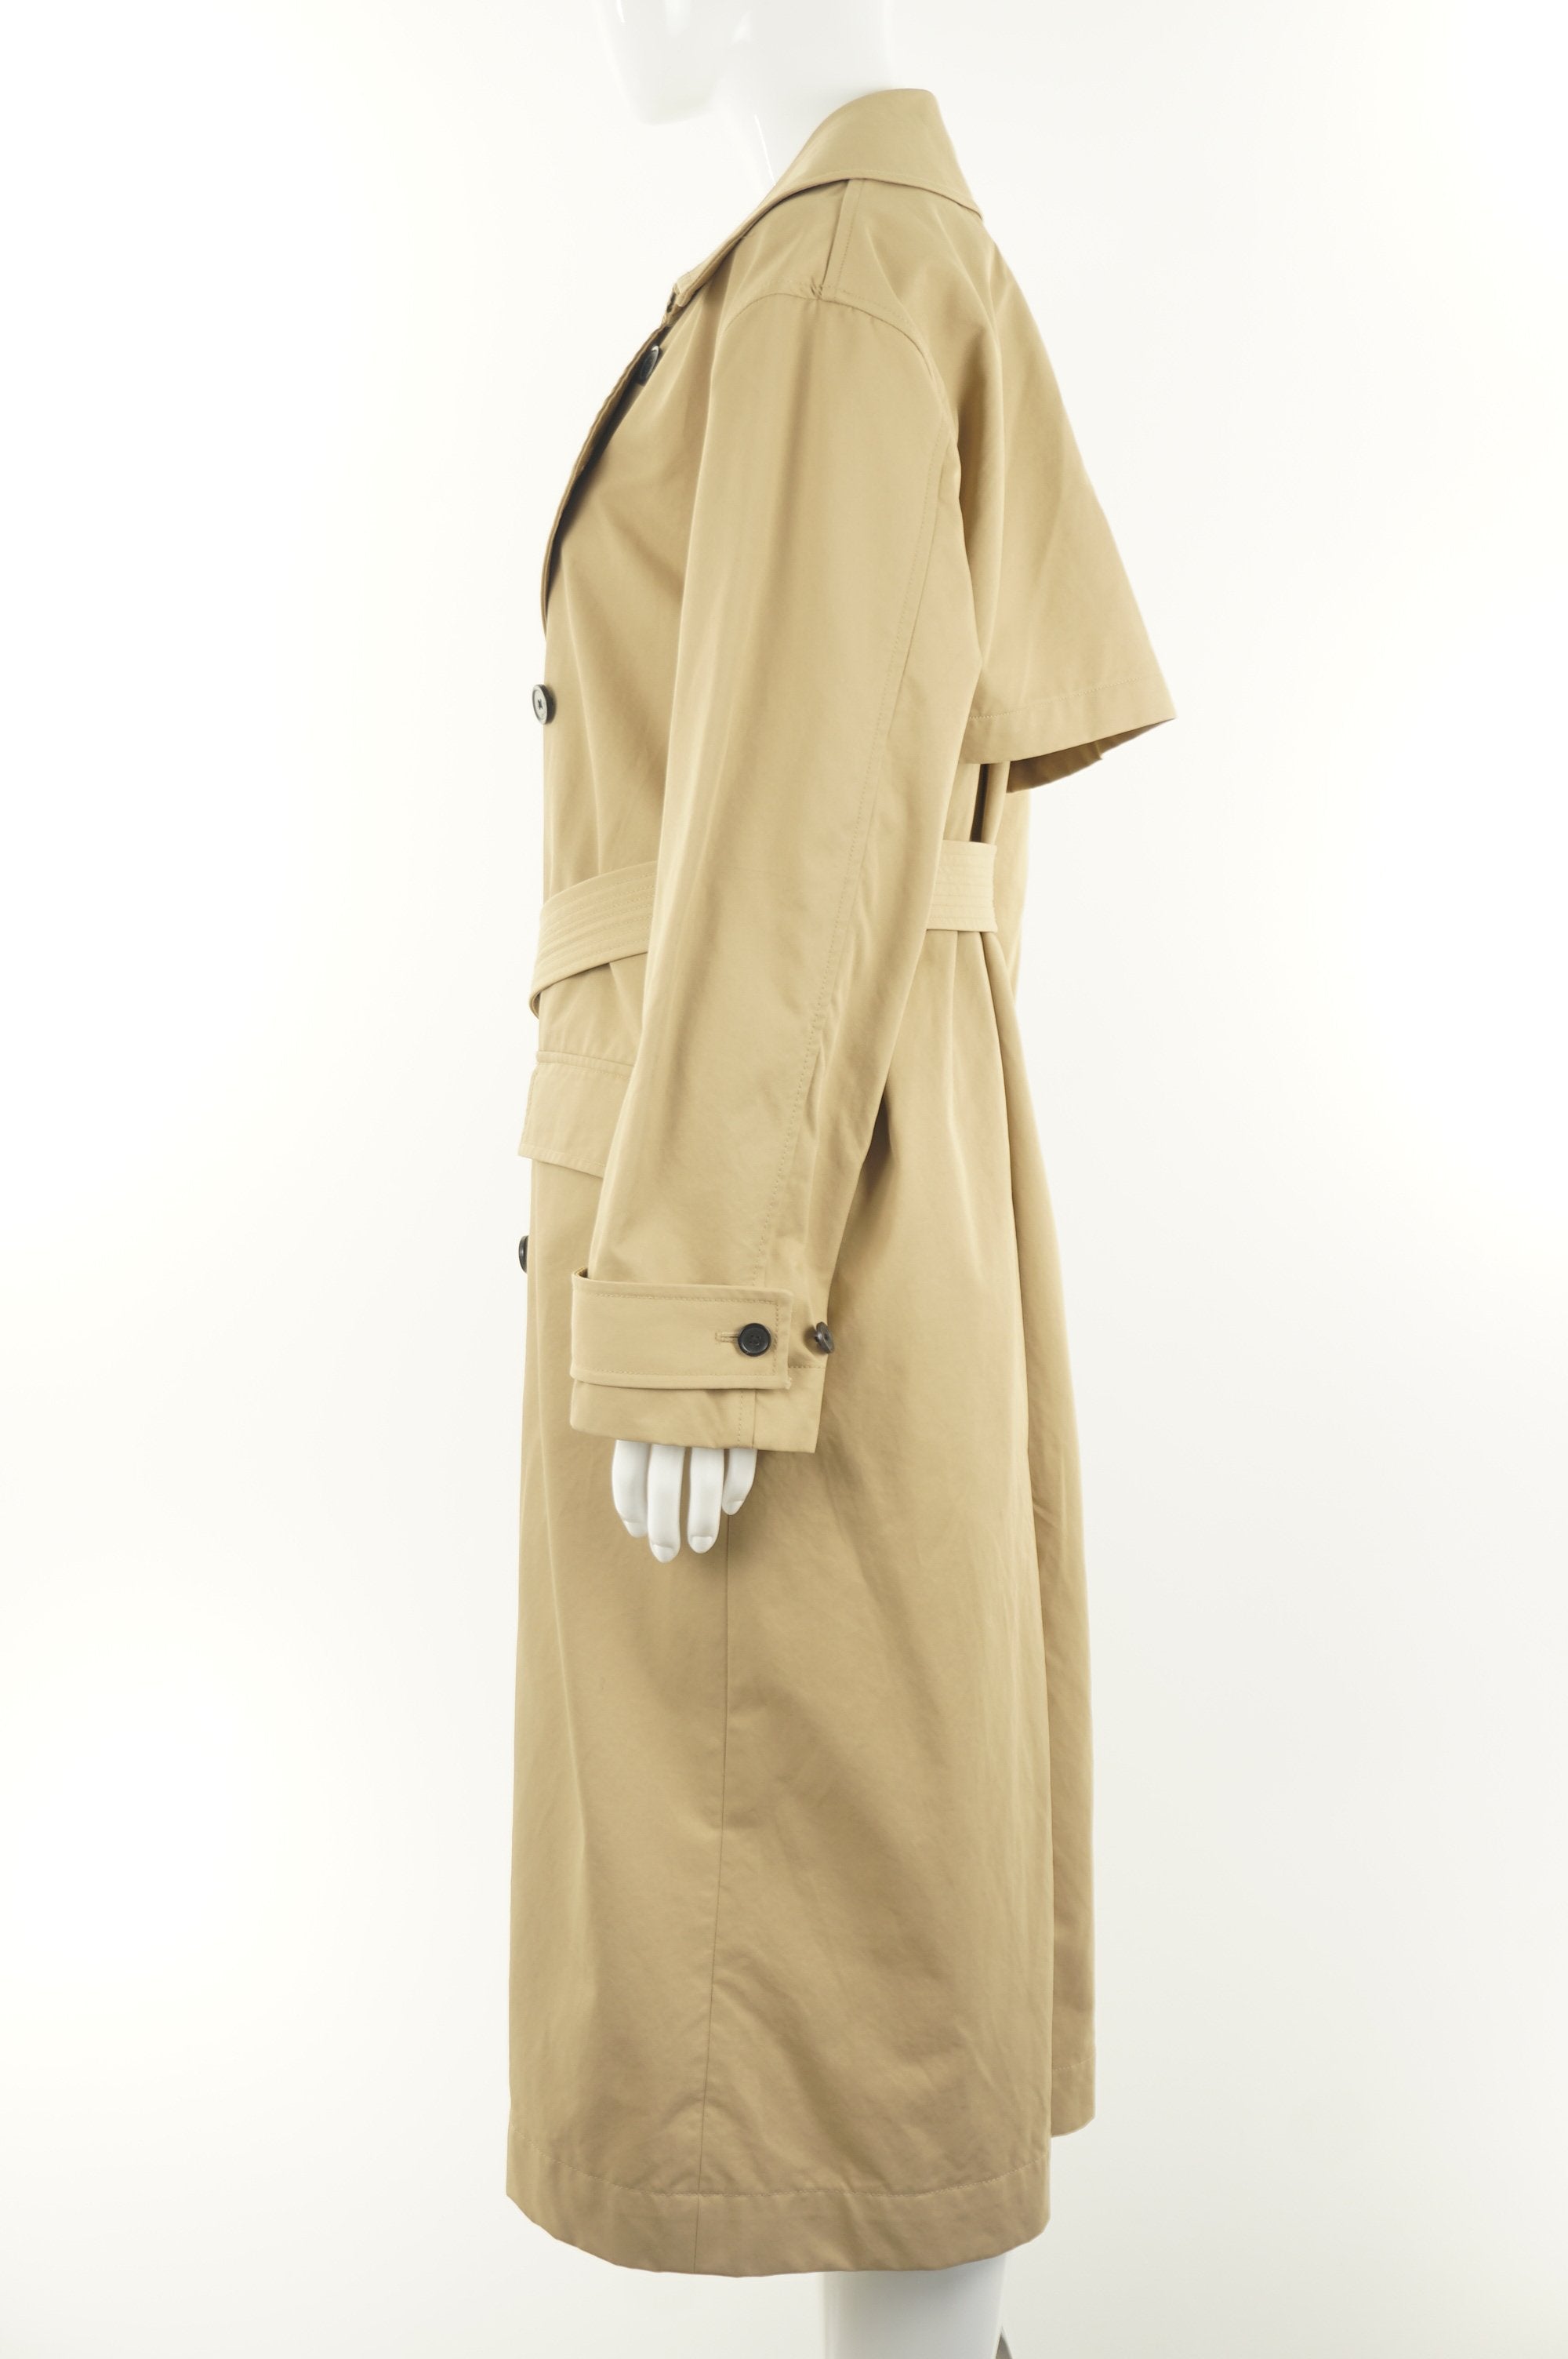 Wilfred Trench Coat, The classic looking trench coat that is perfect for spring! Belted and double breasted design. Fits better on a taller individual., Brown, 52% cotton. 48% Nylon, 